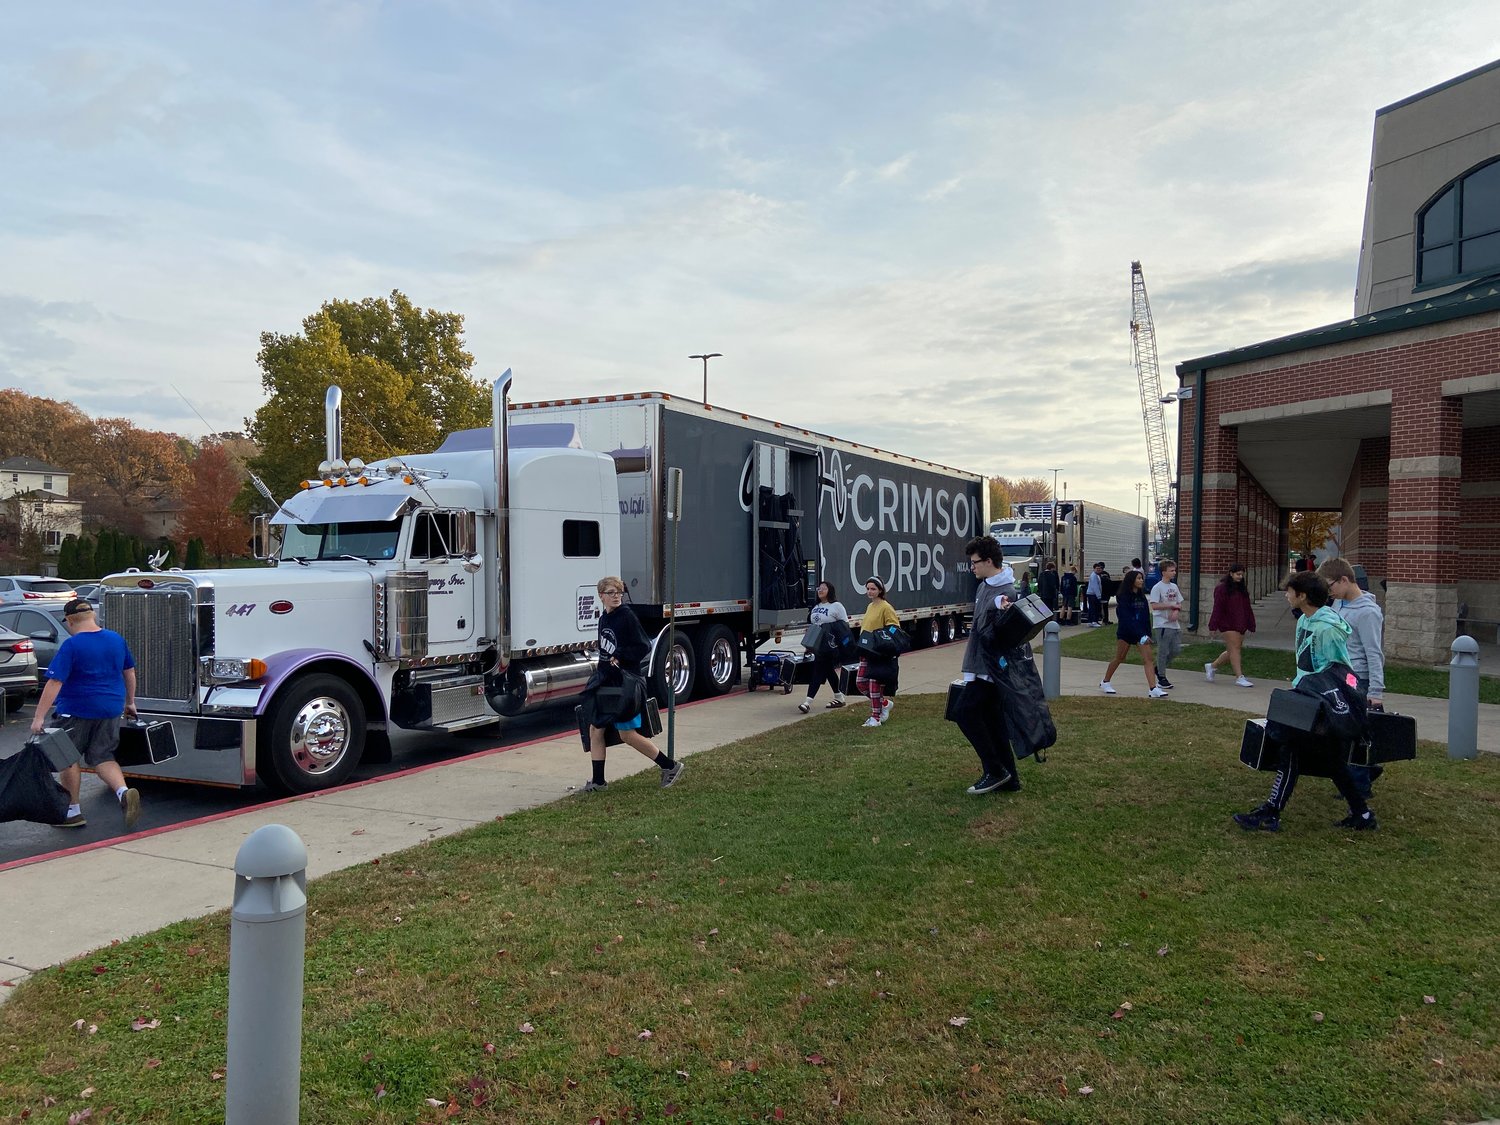 THE NIXA HIGH SCHOOL MARCHING BAND hauls instruments, props and other equipment in a semi-truck.